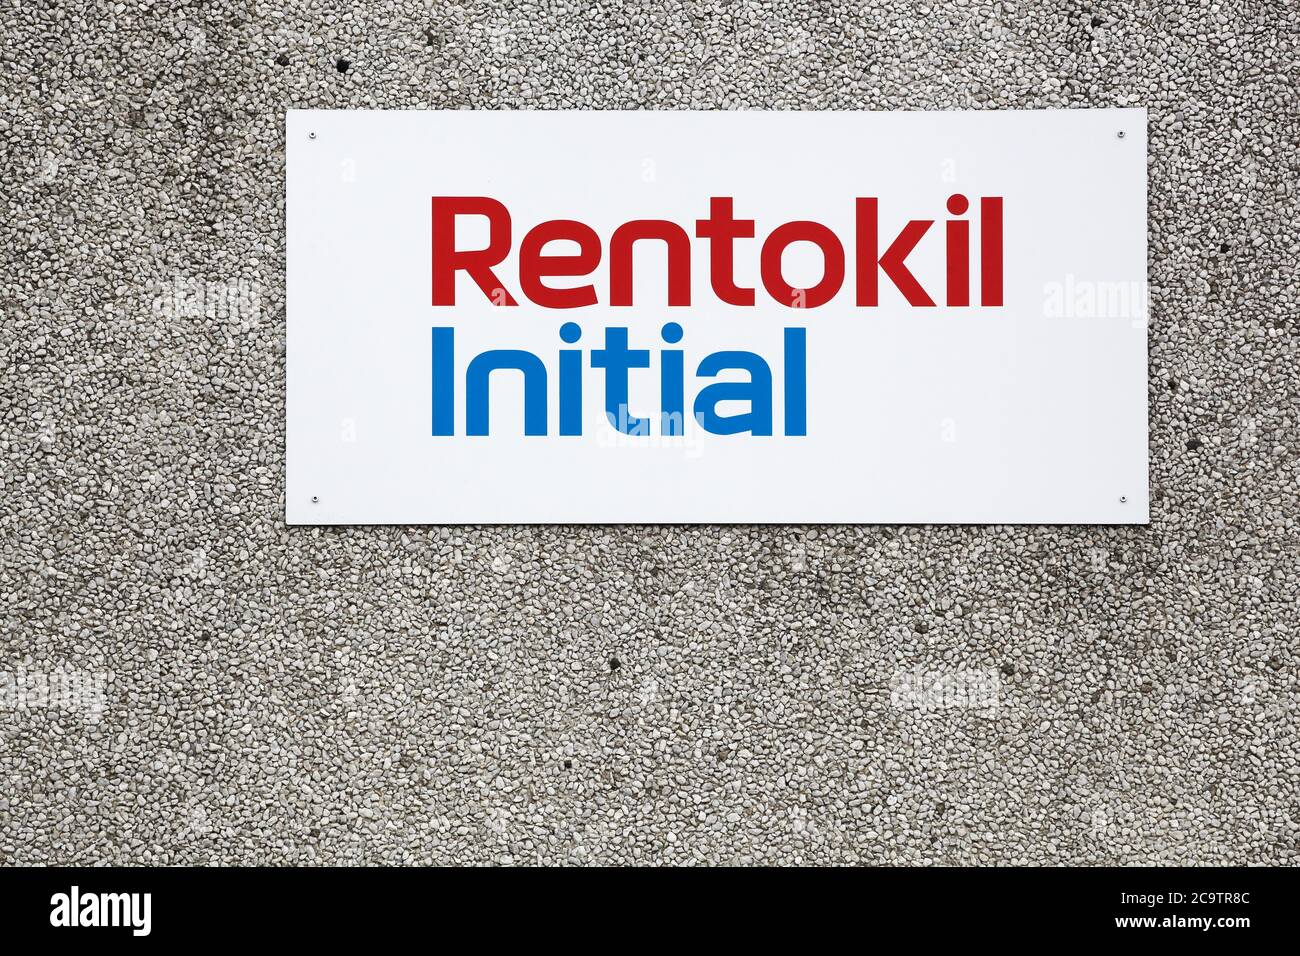 Ega, Denmark - July 25, 2020: Rentokil Initial logo on a wall. Rentokil Initial is a British business services group and specialized in hygiene Stock Photo